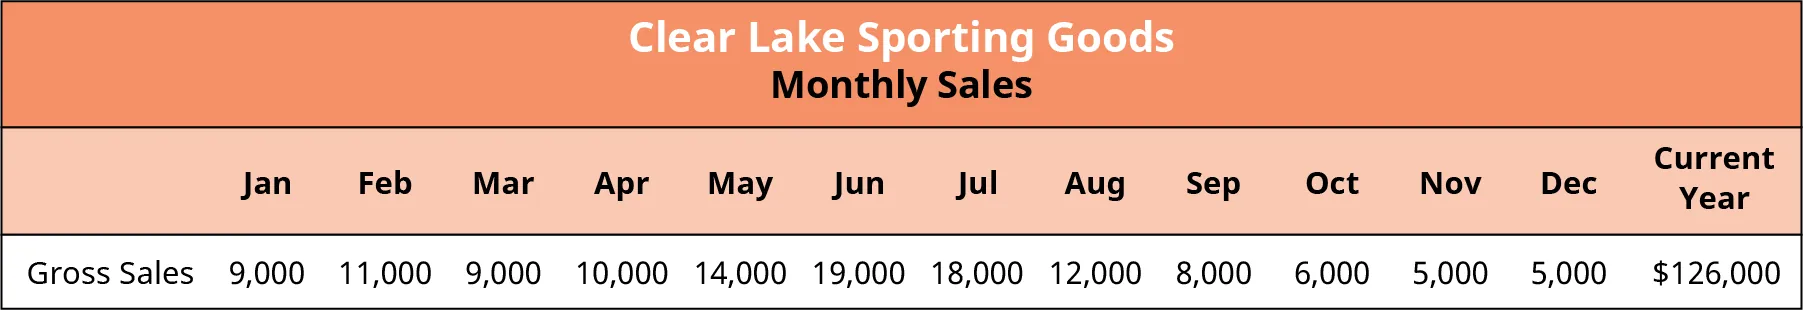 Historical Gross Sales Data for Clear Lake Sporting goods shows the monthly gross sales for January through December. The monthly sales are added together to show the total gross sales for the current year.